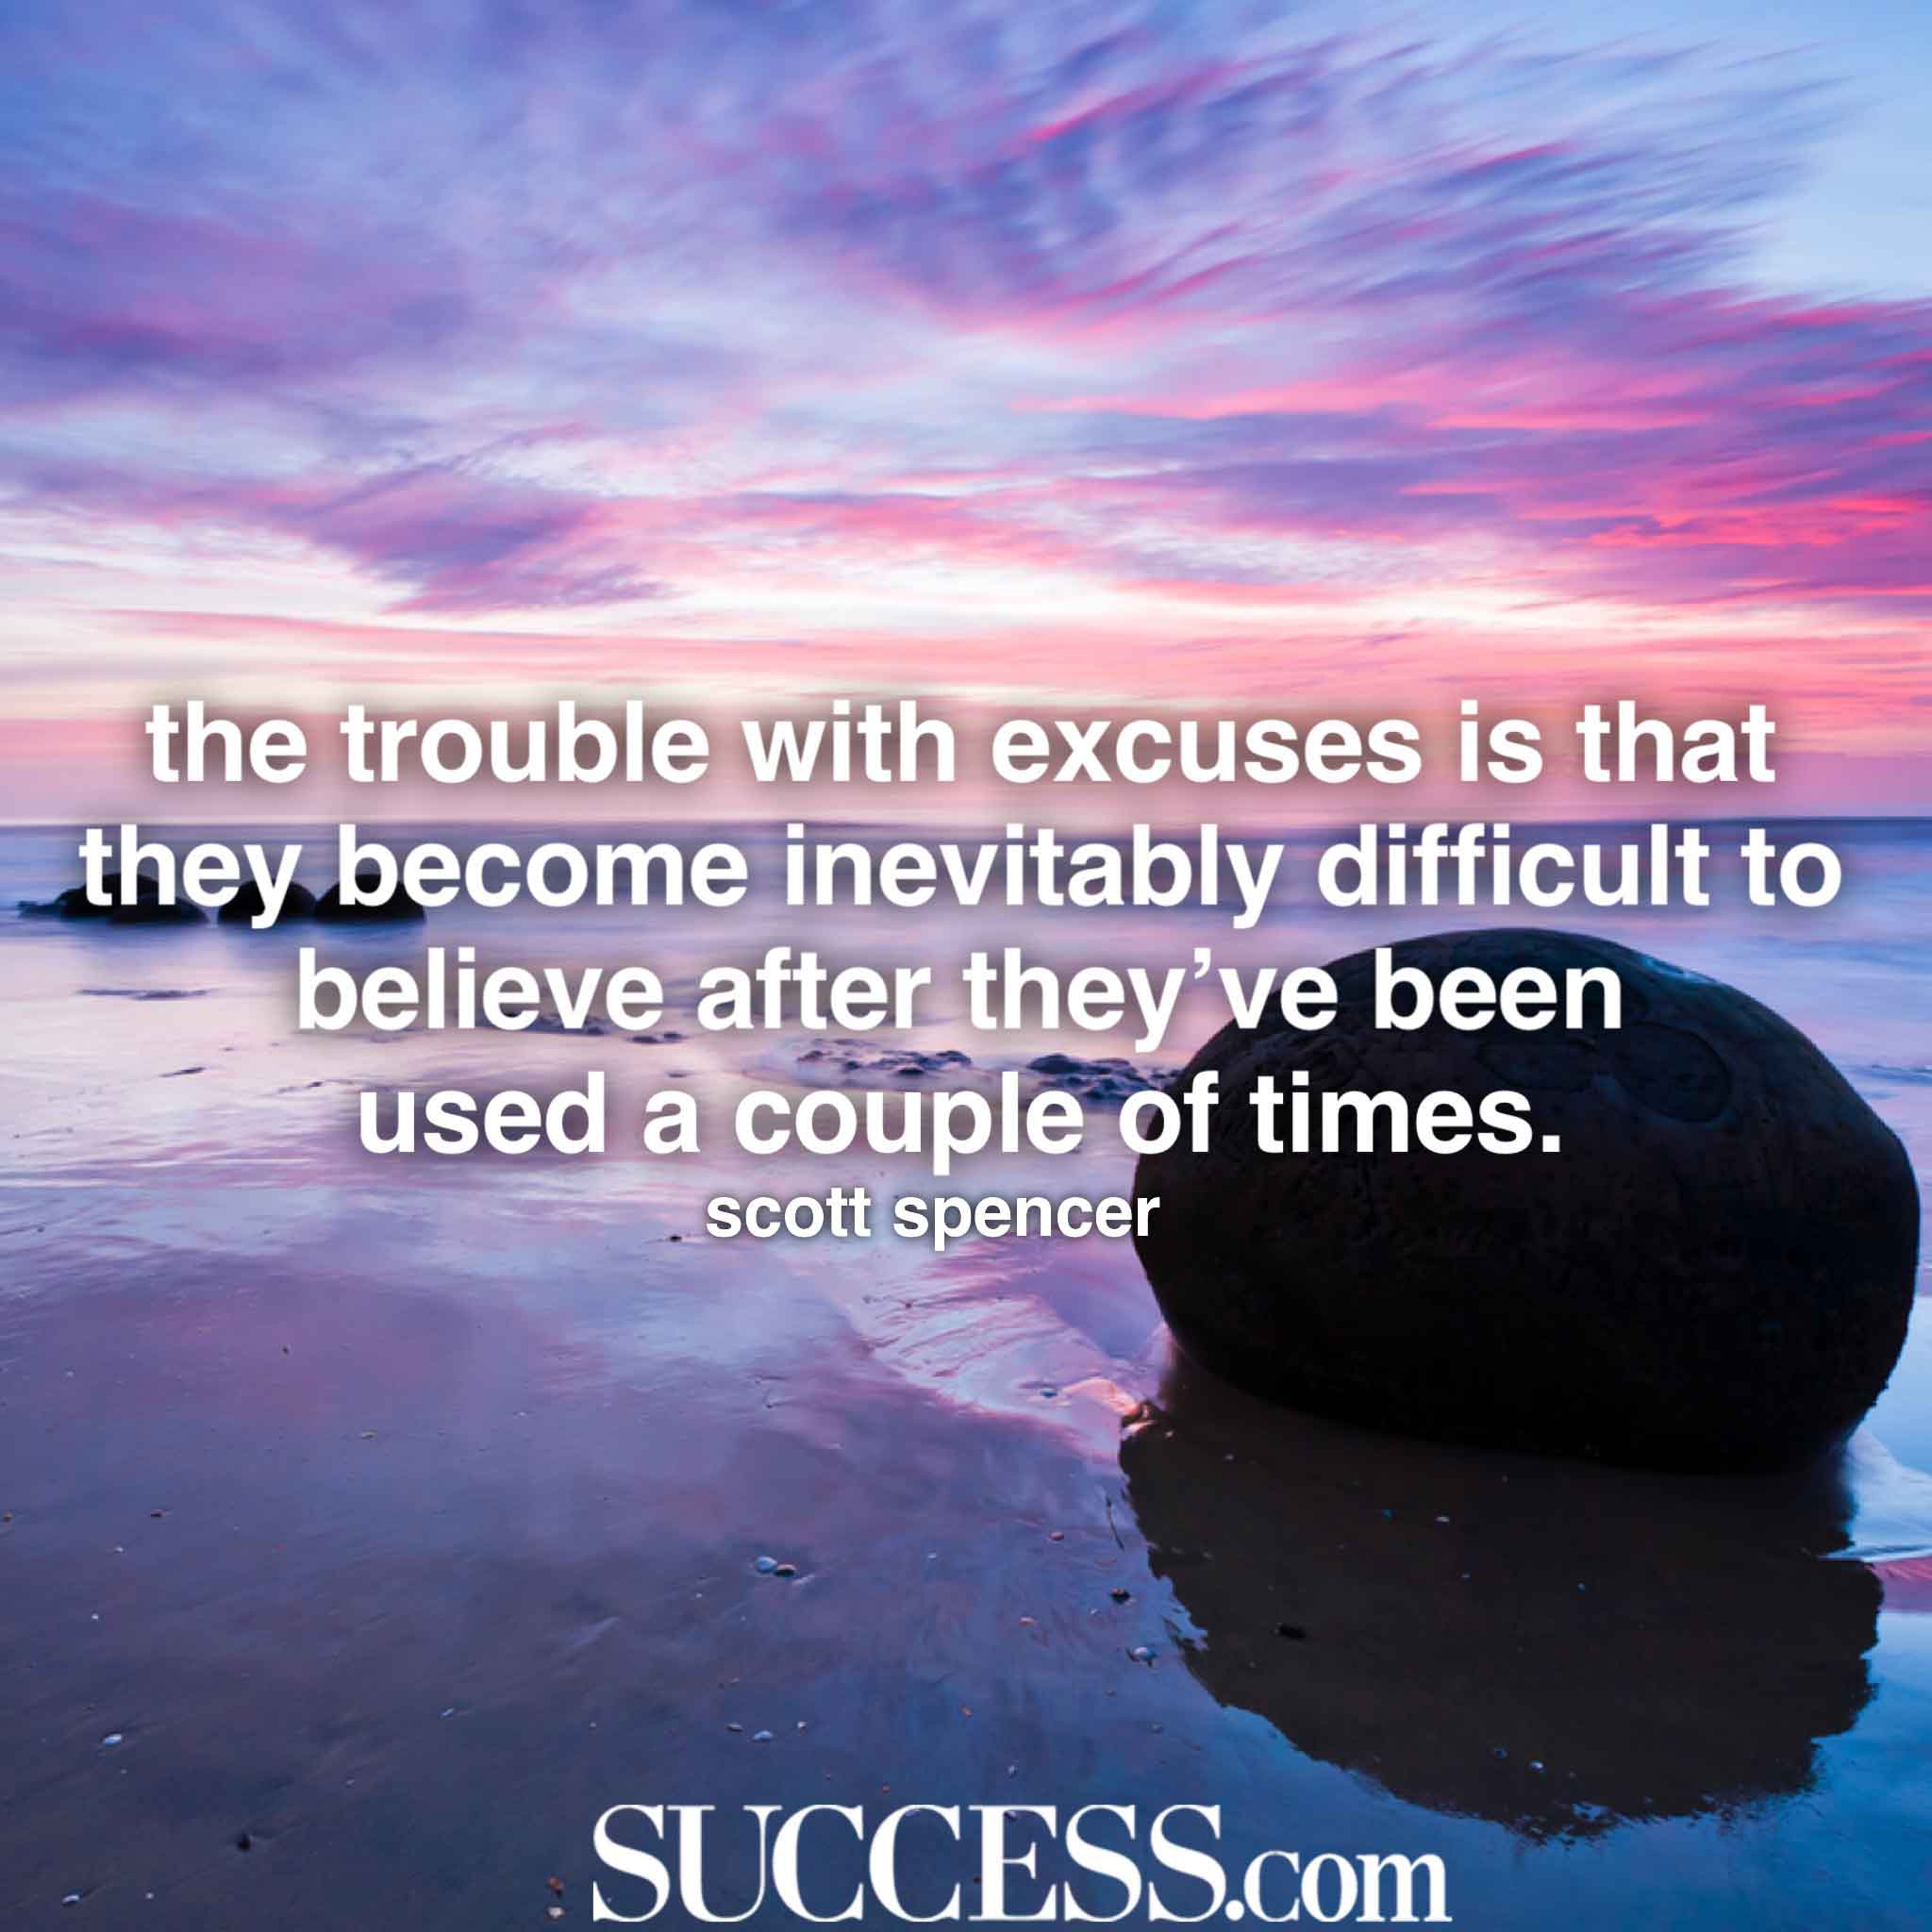 15 Motivational Quotes to Stop Making Excuses